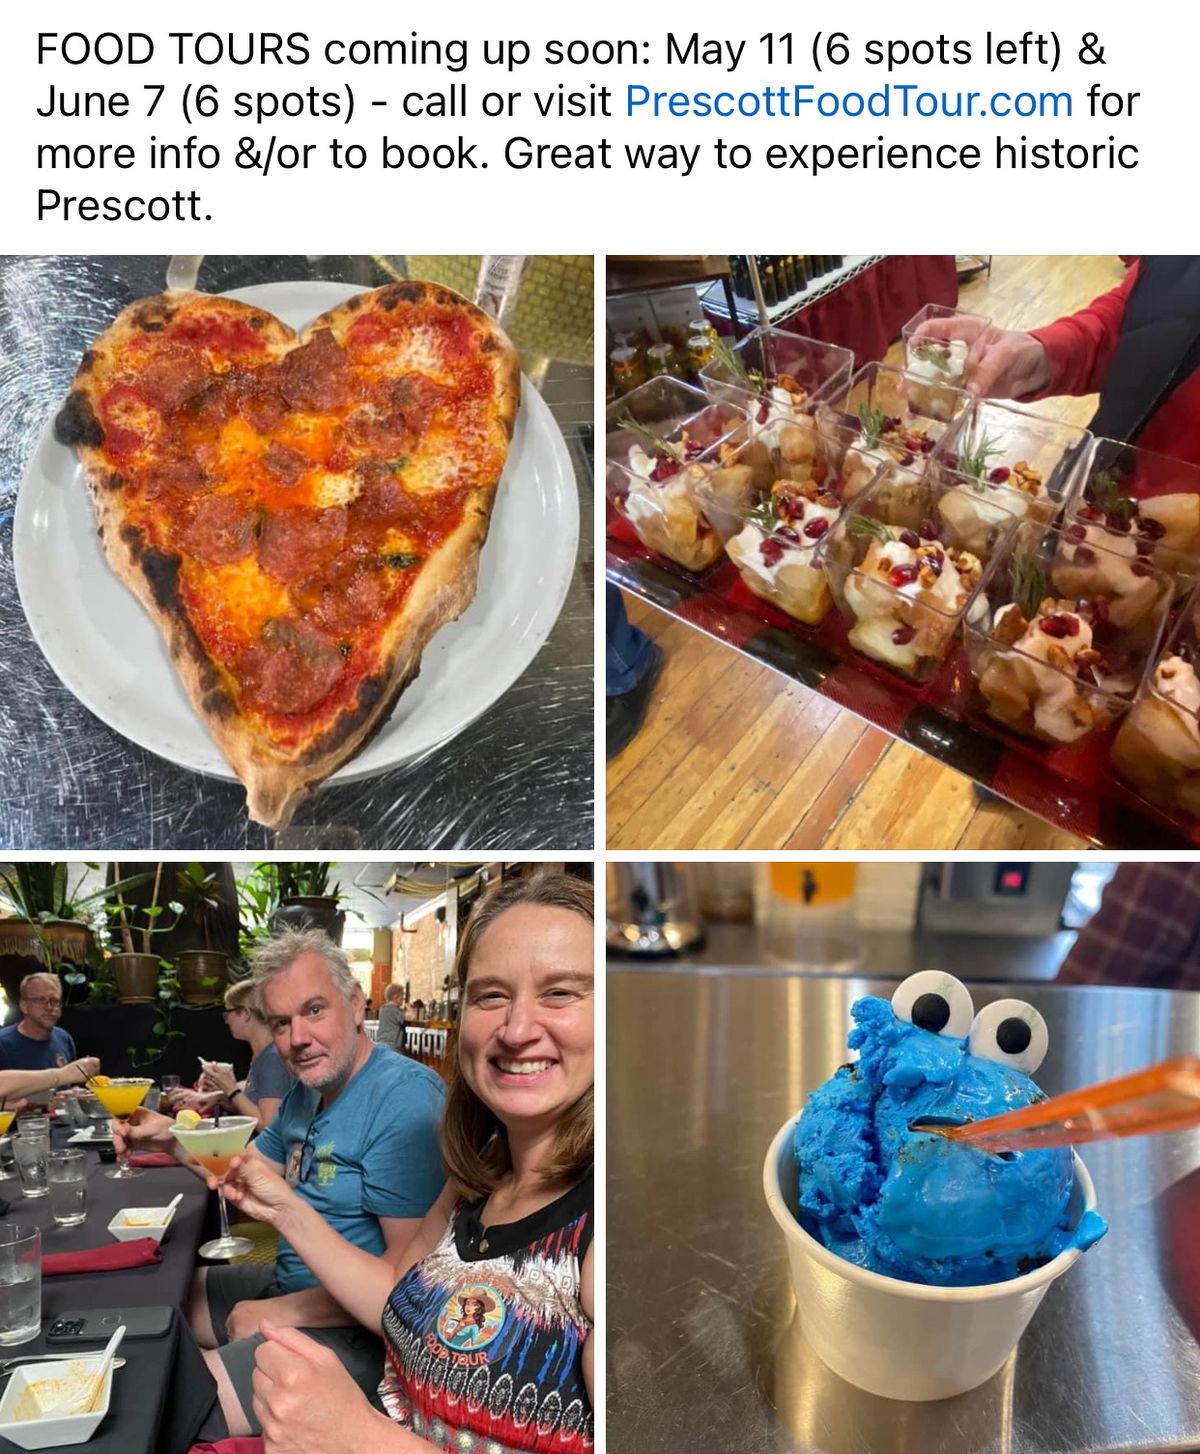 Afternoon Food Tour of historic downtown Prescott